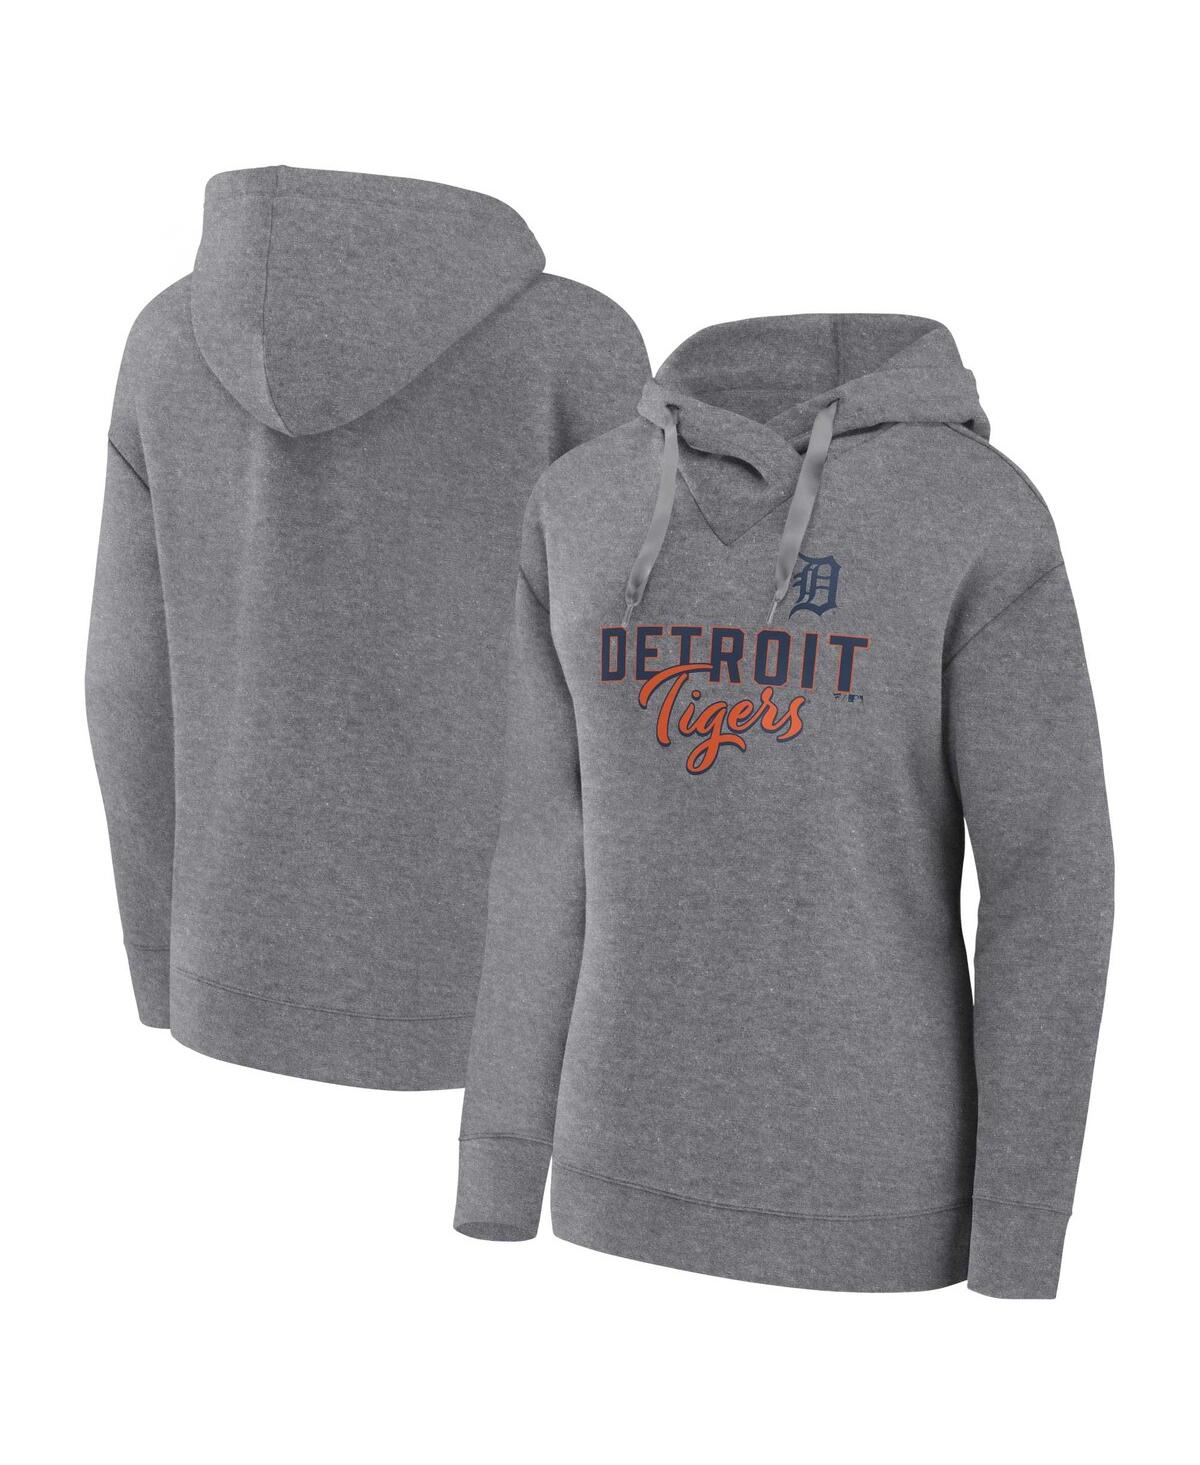 PROFILE WOMEN'S PROFILE HEATHER GRAY DETROIT TIGERS PLUS SIZE PULLOVER HOODIE